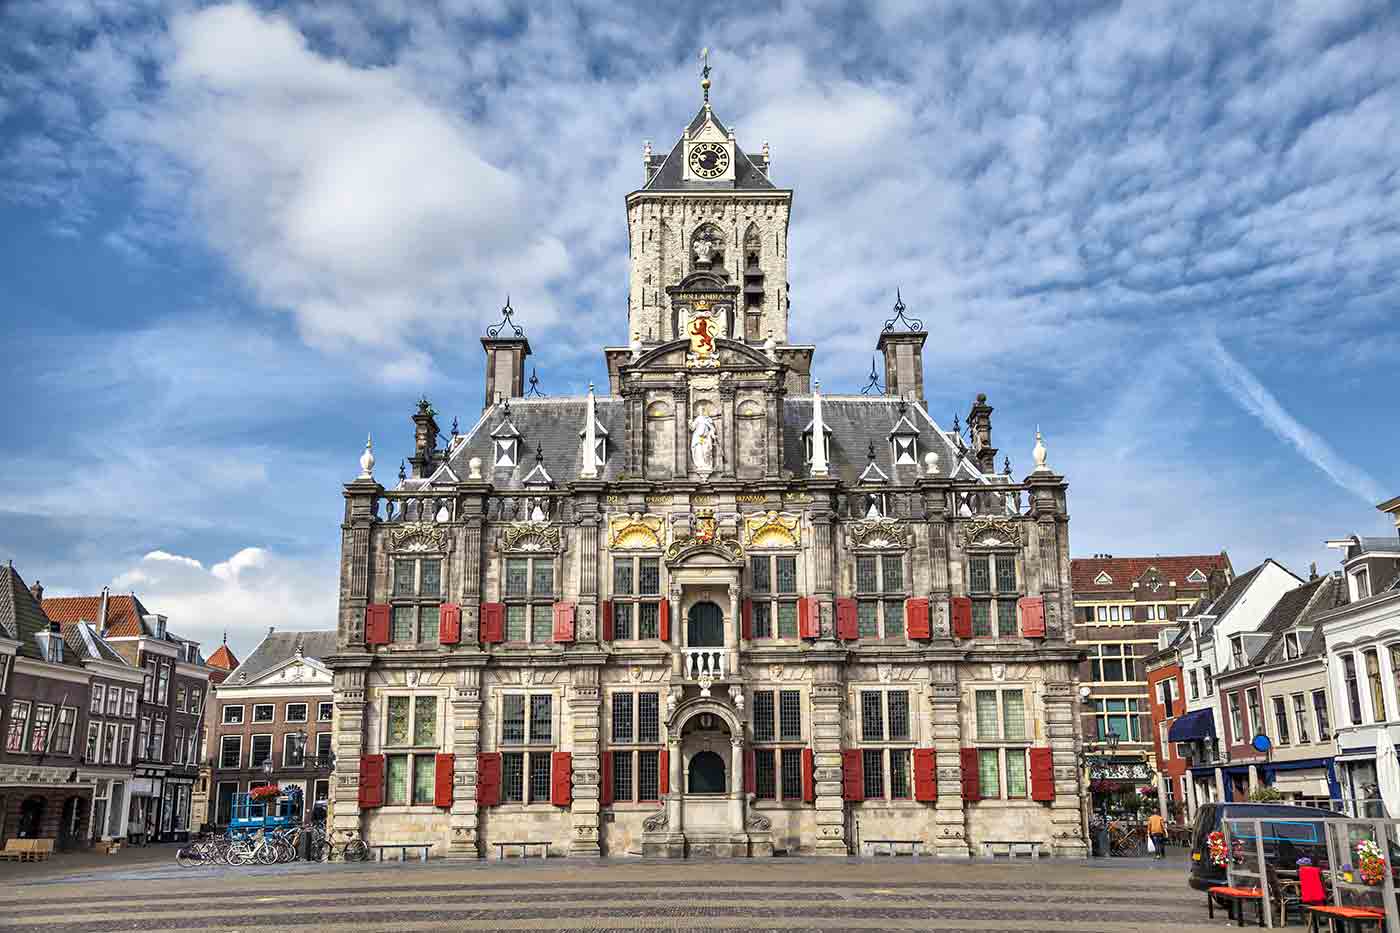 The Best Things to Do and See in Delft